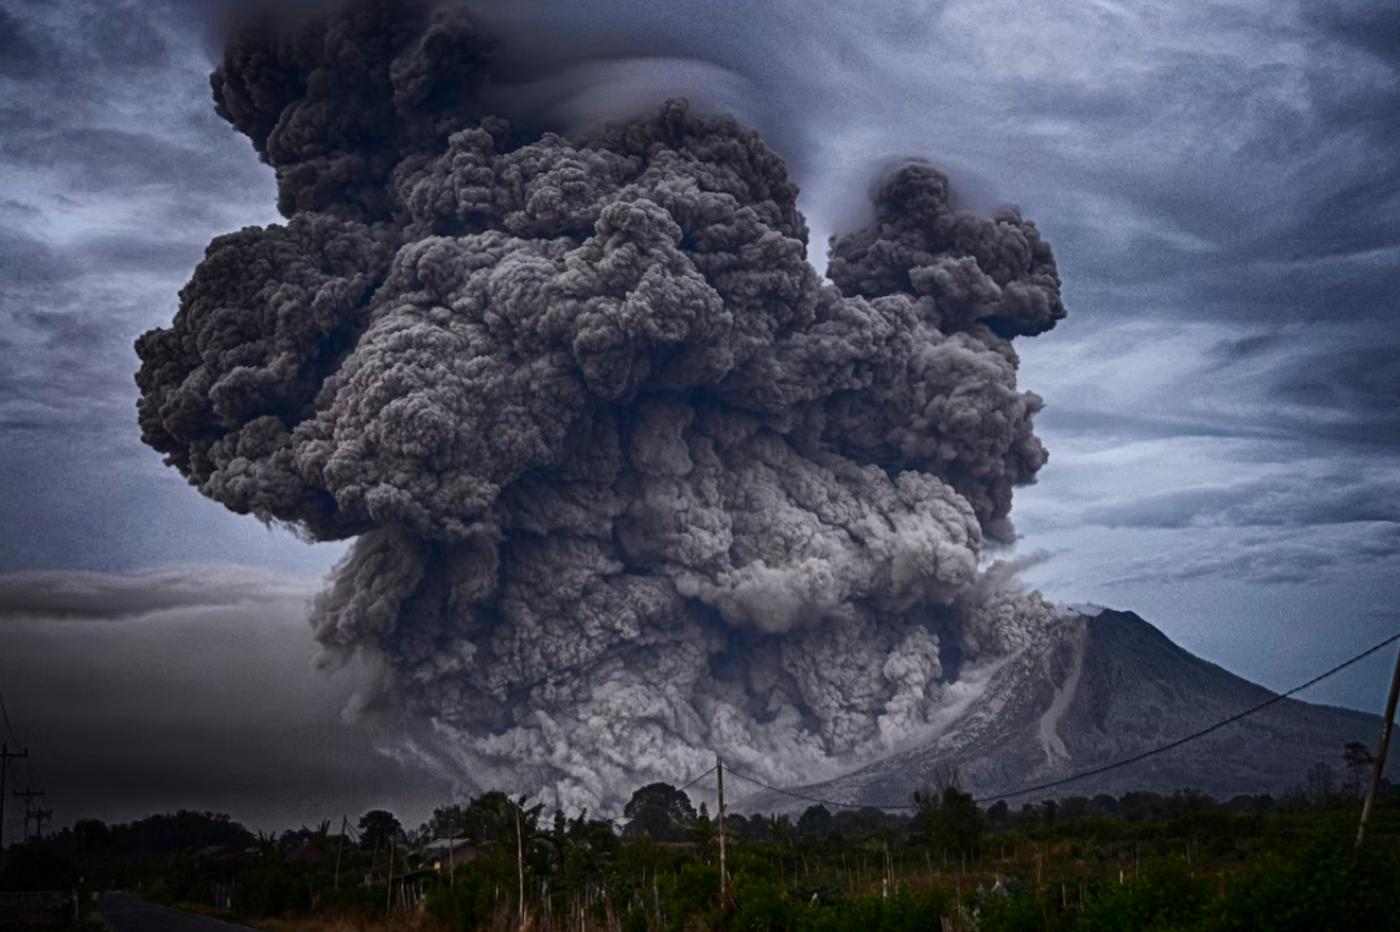 the world is not at all ready for the next super-eruption